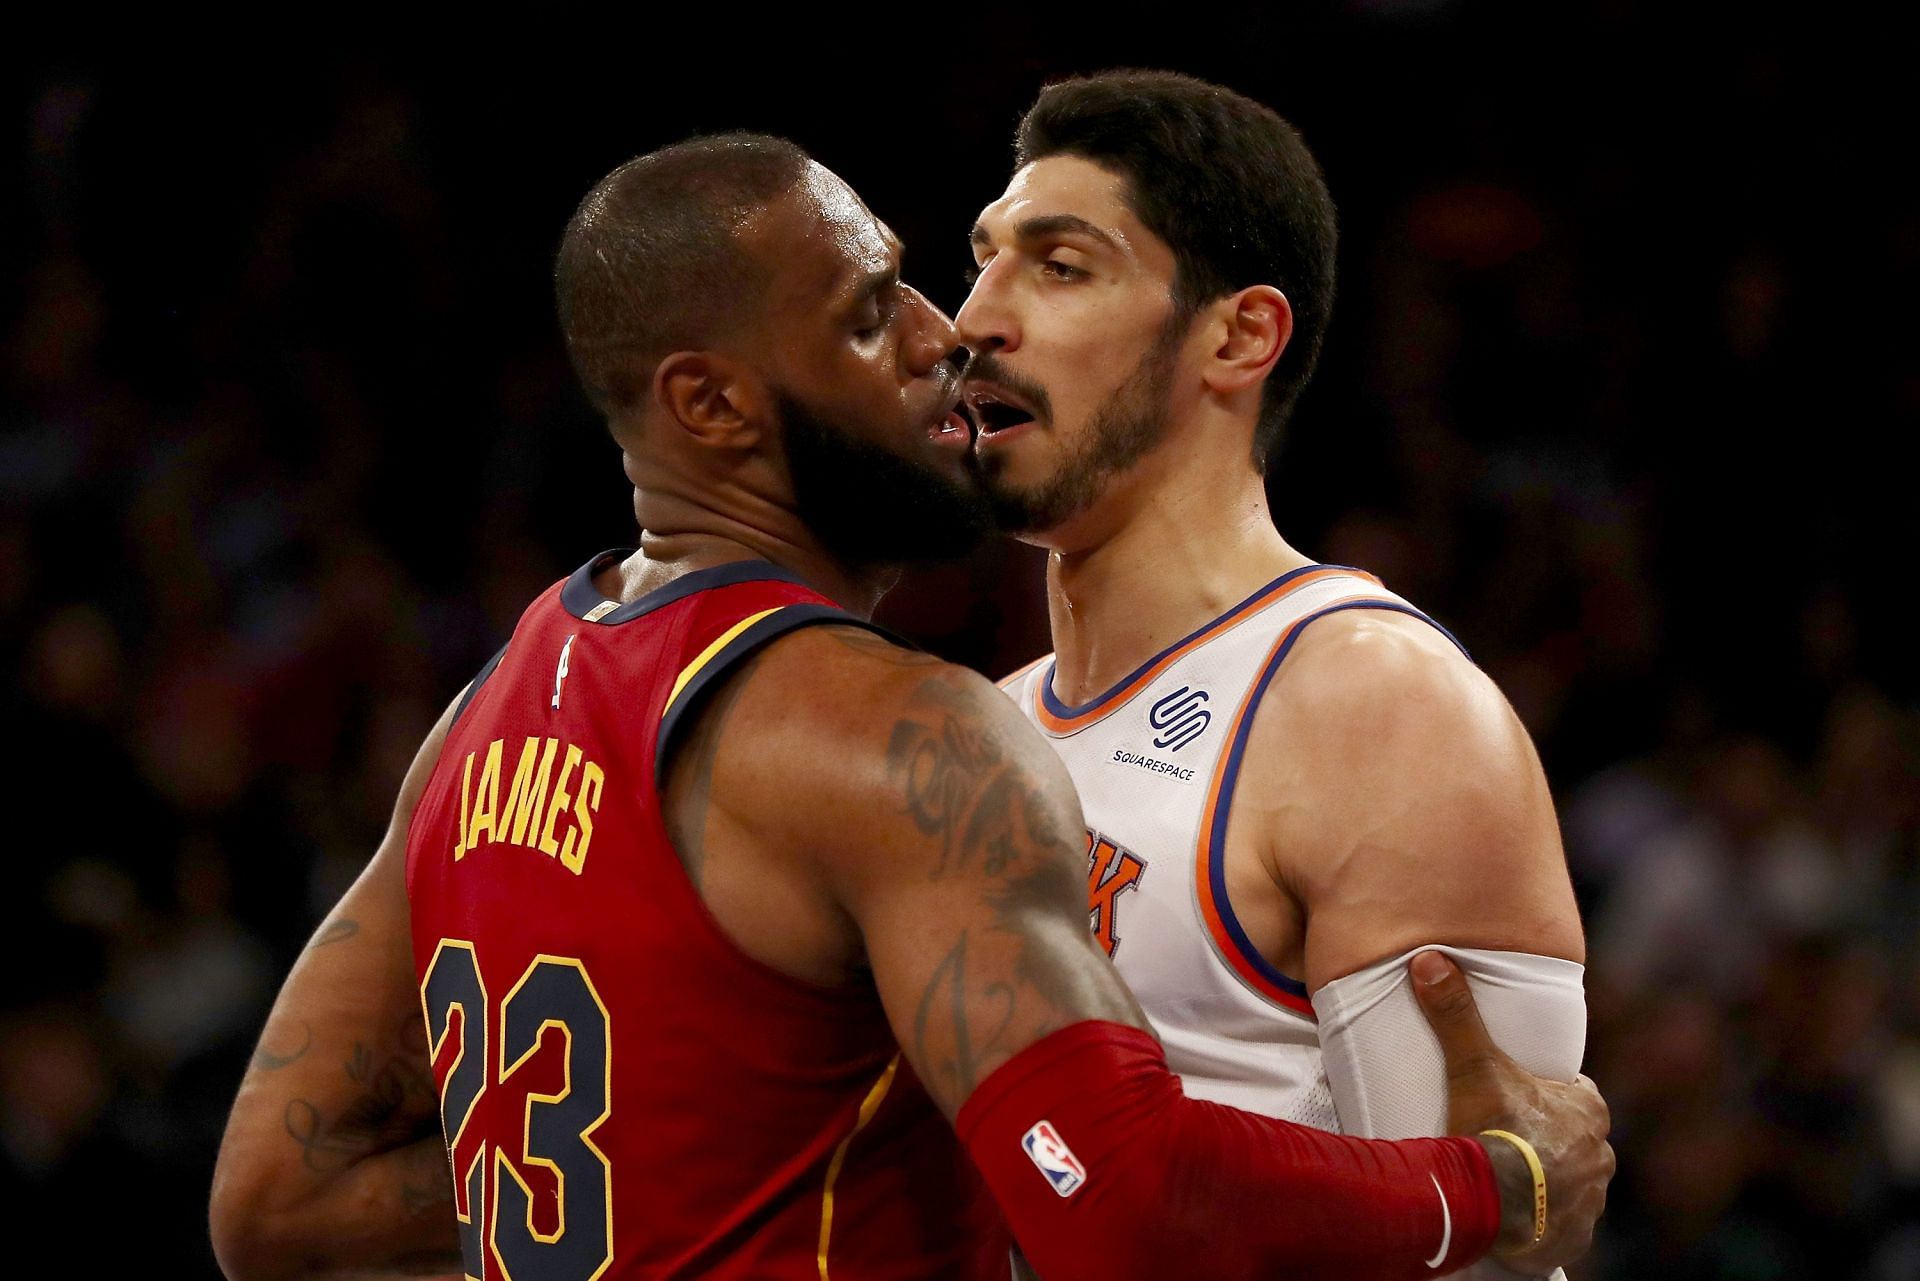 Enes Kanter Freedom and LeBron James have an on-court disagreement in the 2017-18 NBA season